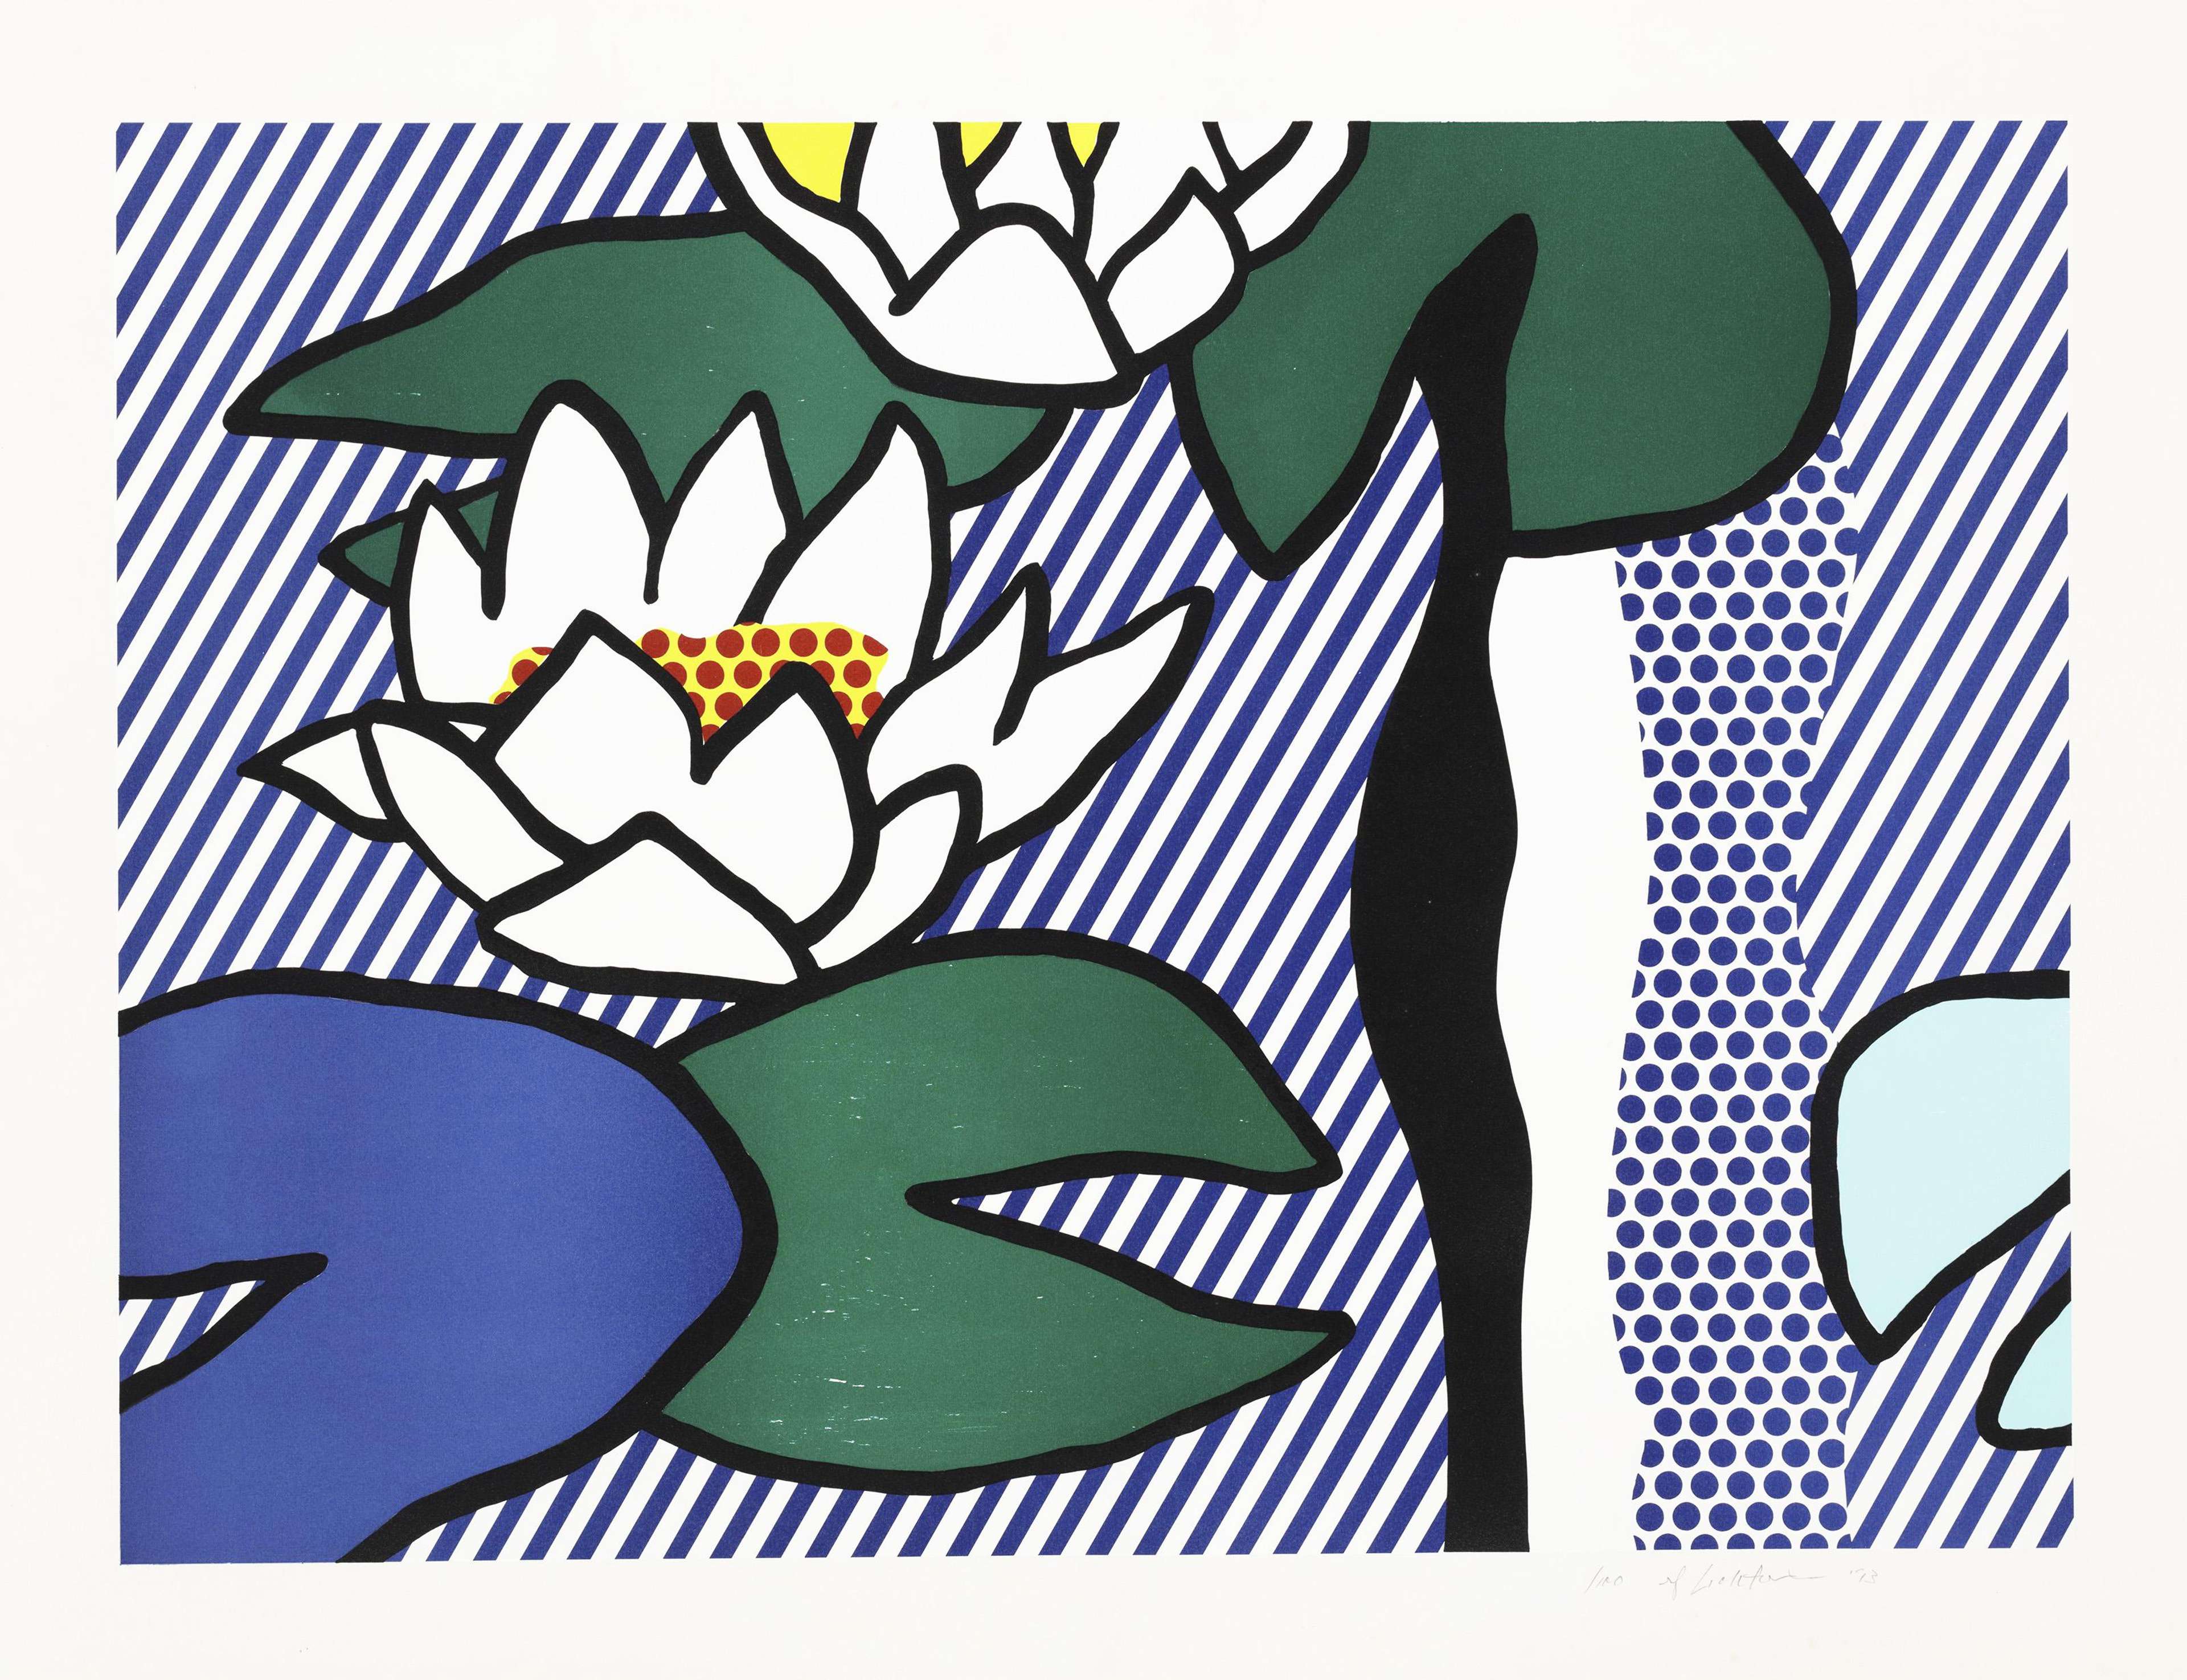 A mixed media artwork by Roy Lichtenstein depicting water lilies resting on water, the artwork portrays flower petals and leaves rendered in bold primary and secondary colours.